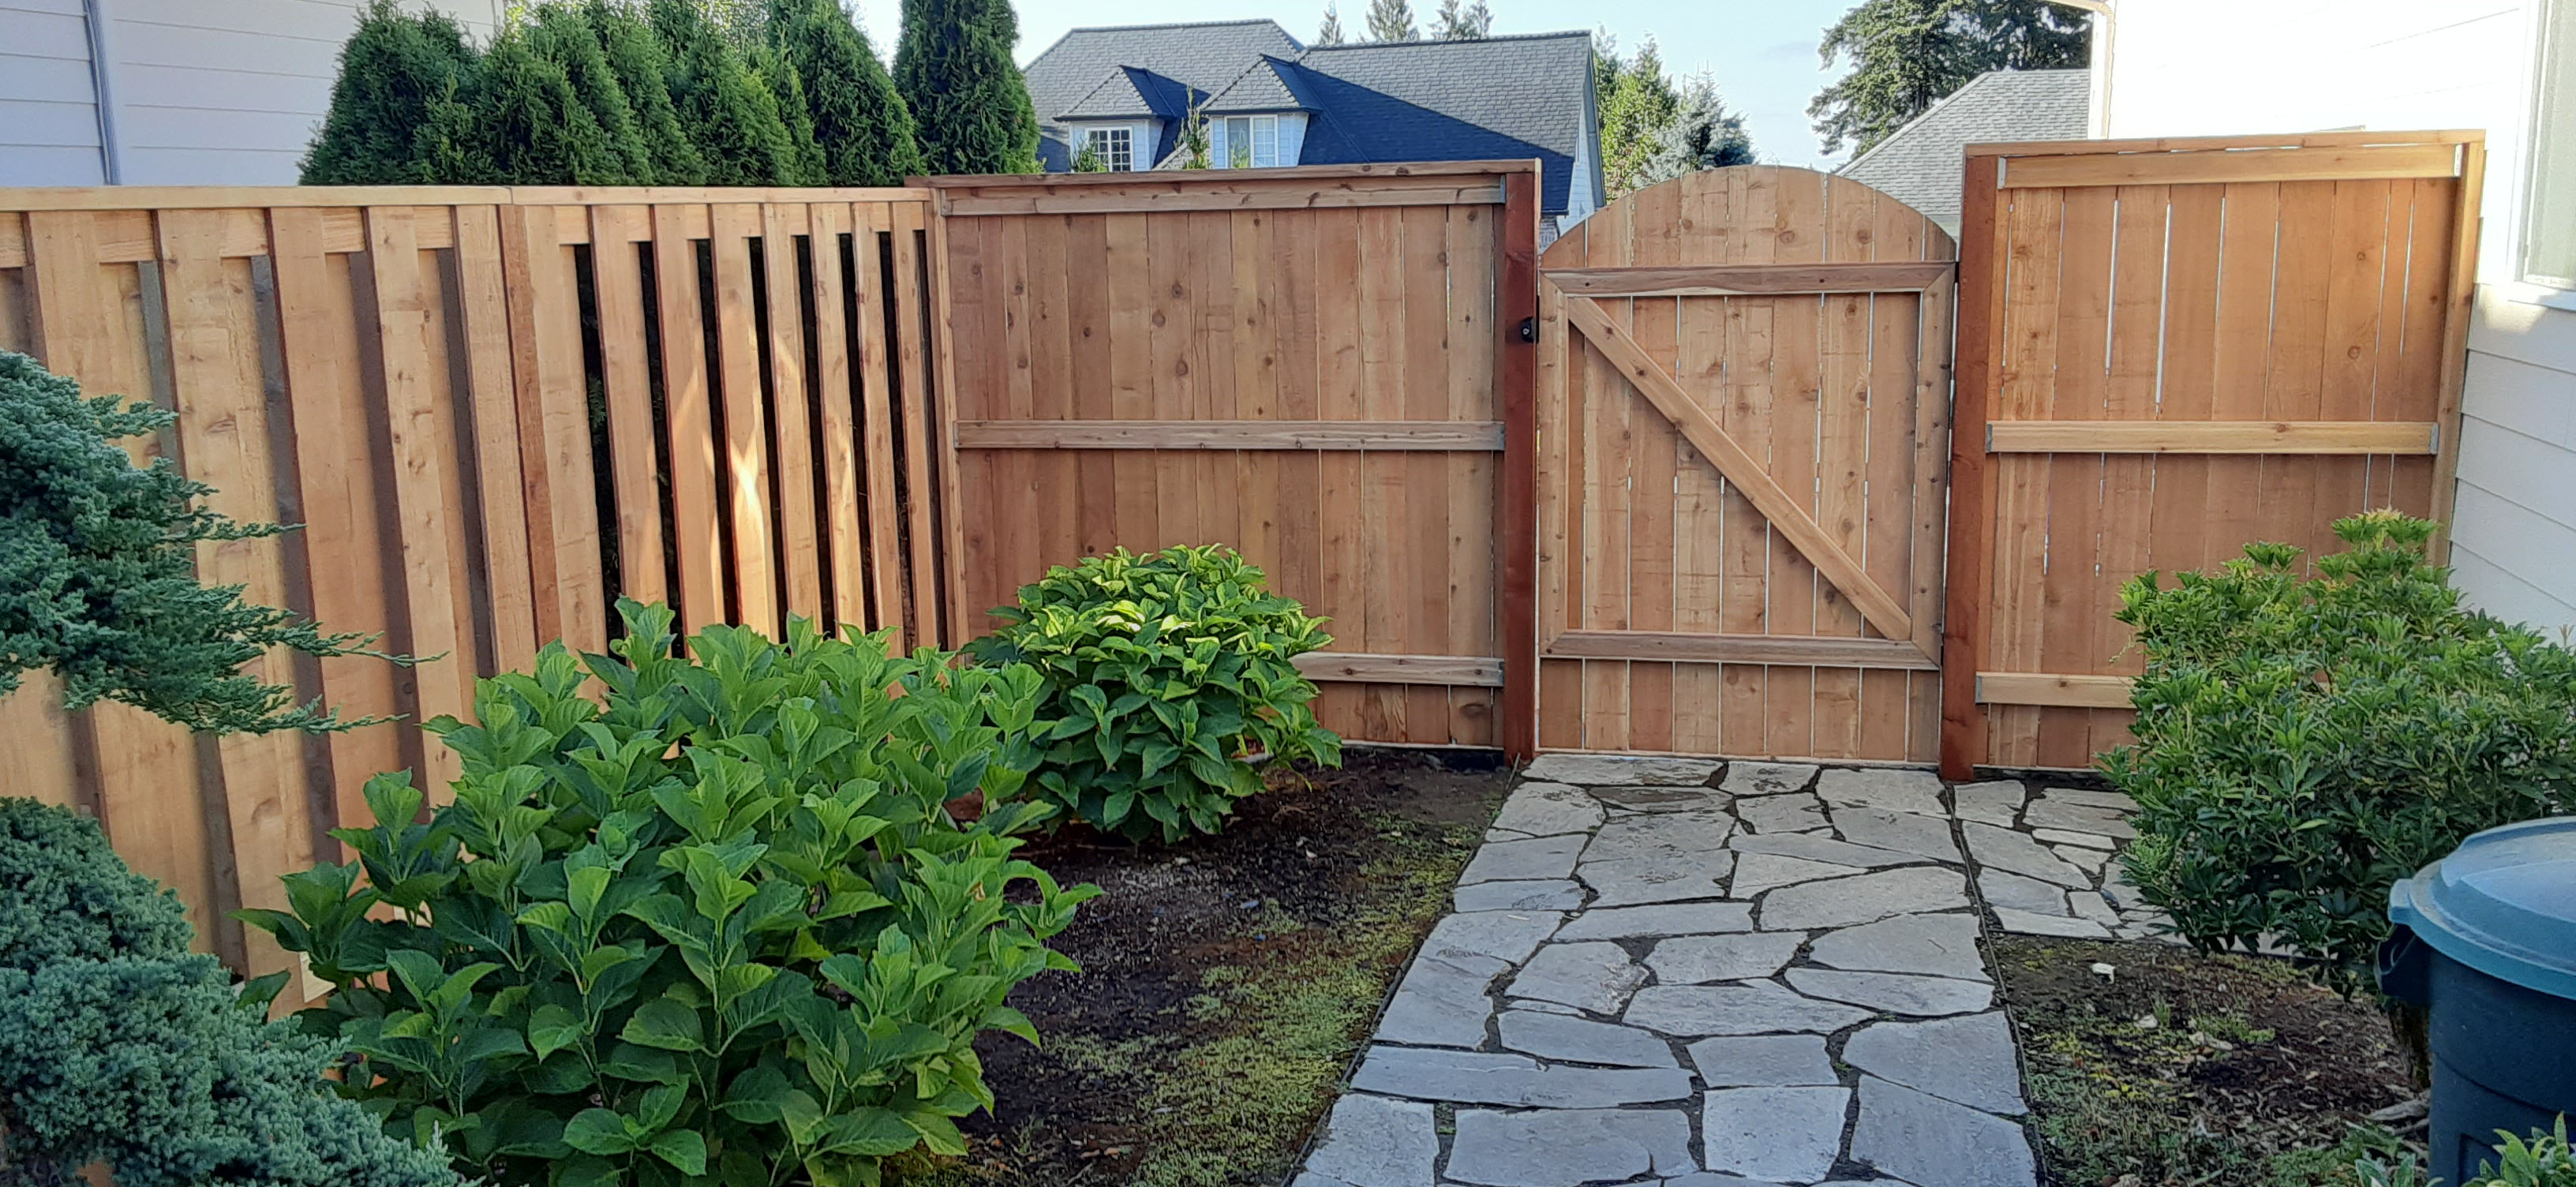 Remodeled wood fence with nicely built gate